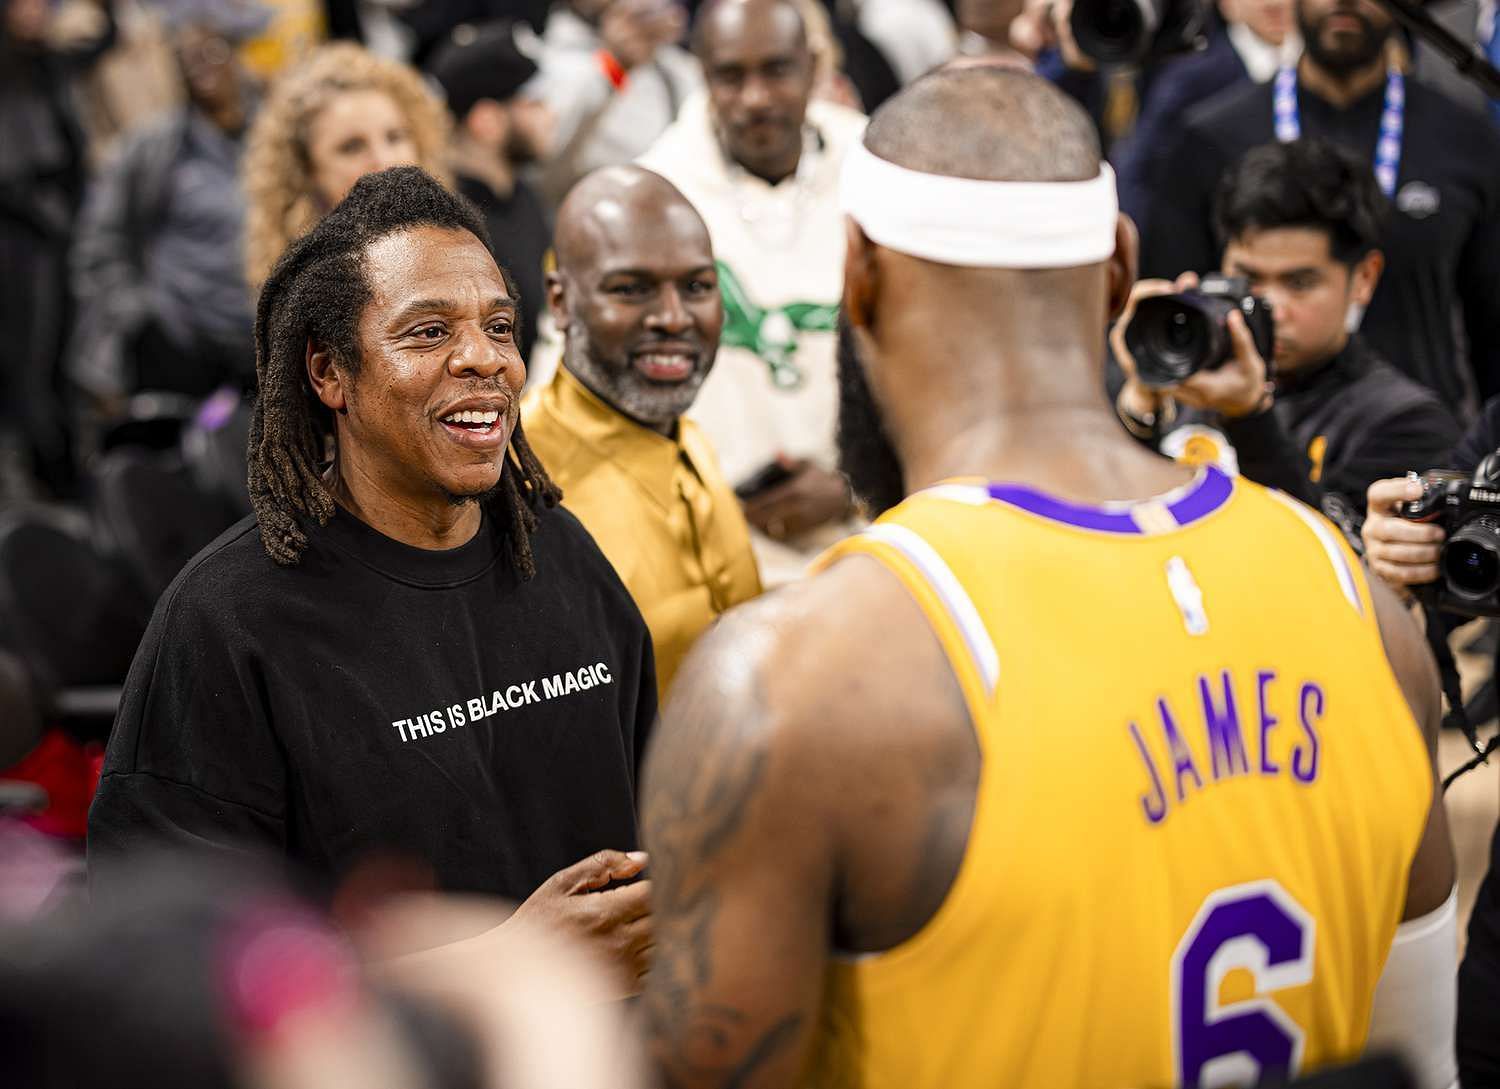 Jay-Z congralulating LeBron James after the LA Lakers superstar became the NBA